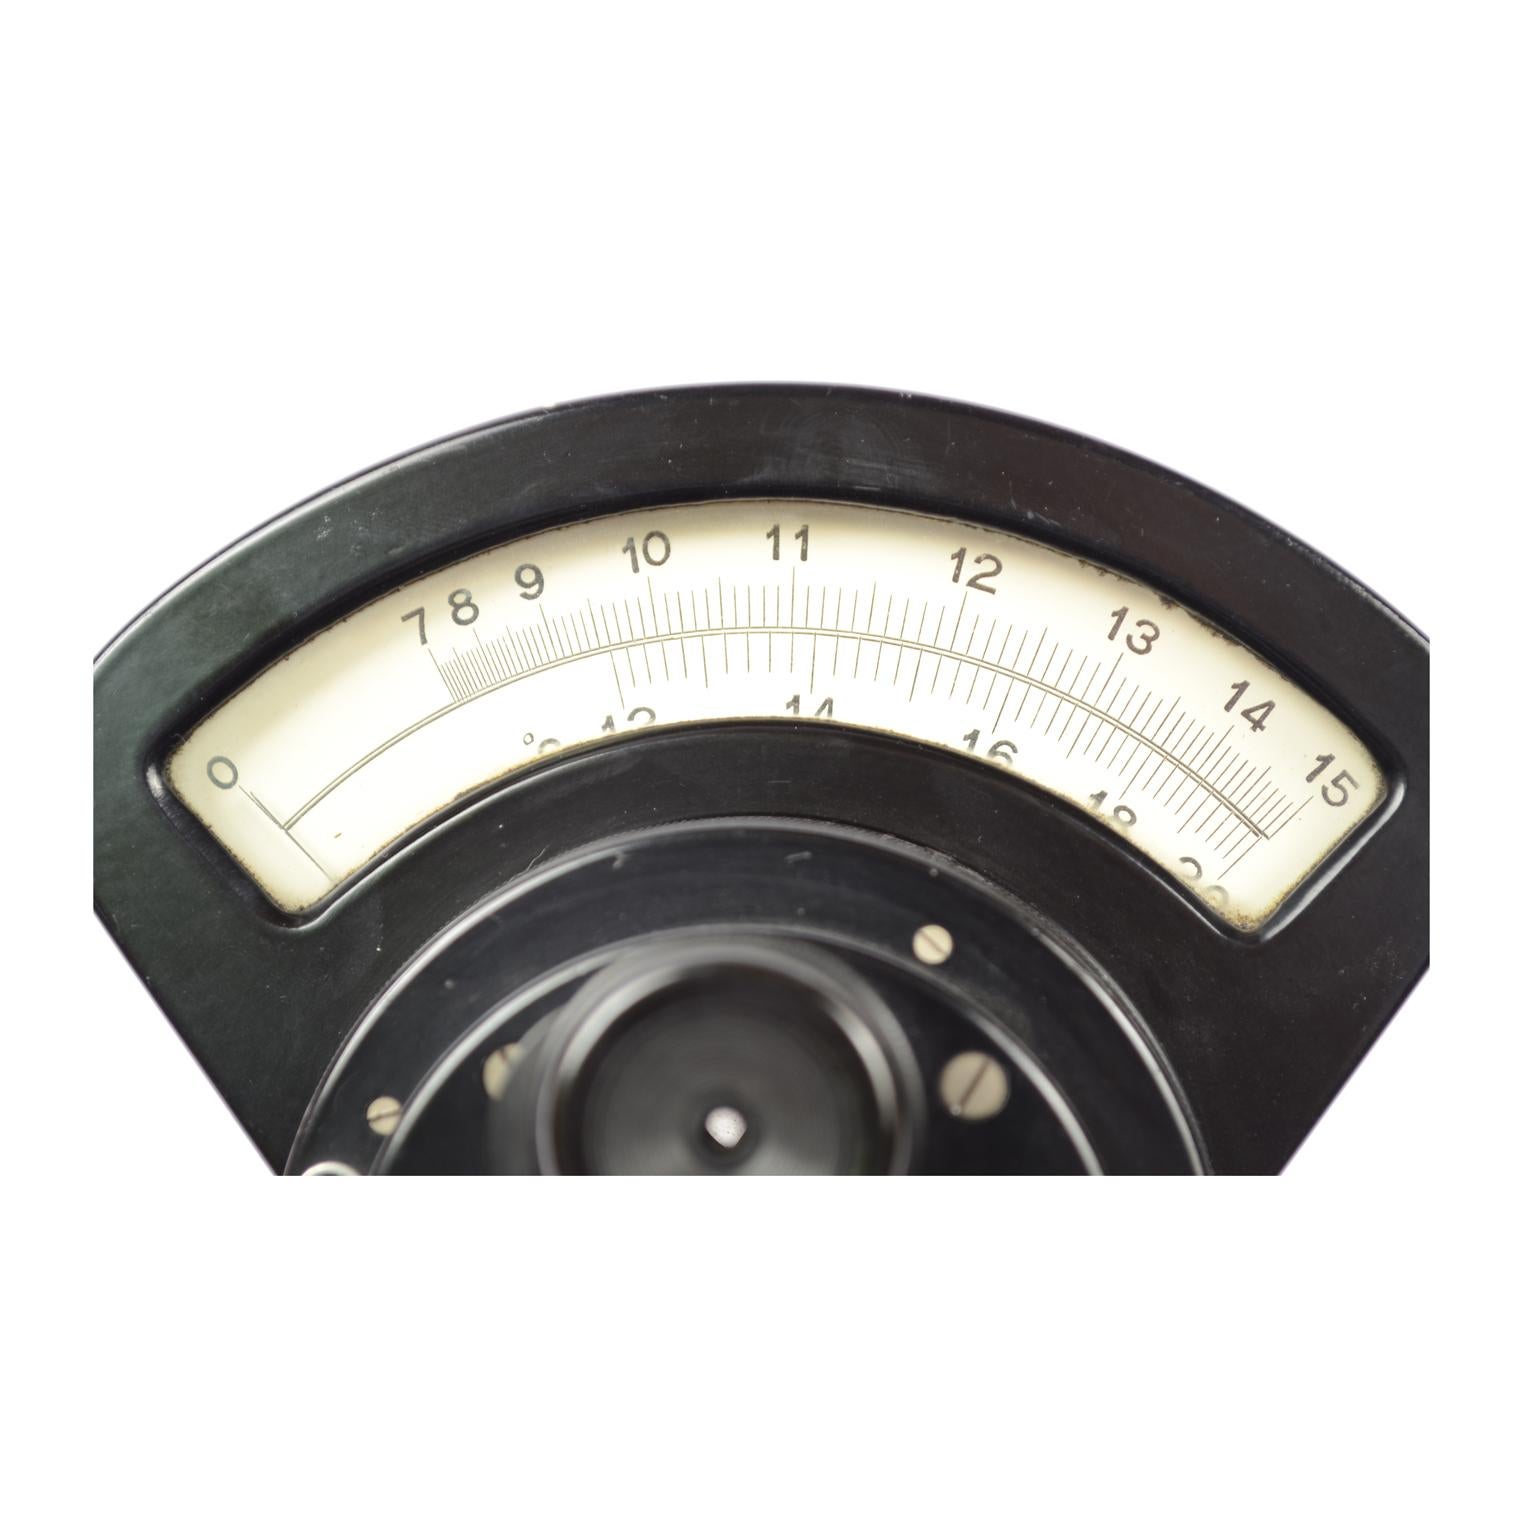 Mid-20th Century Radiation Optical Pyrometer Made of Black Painted Metal in the 1950s